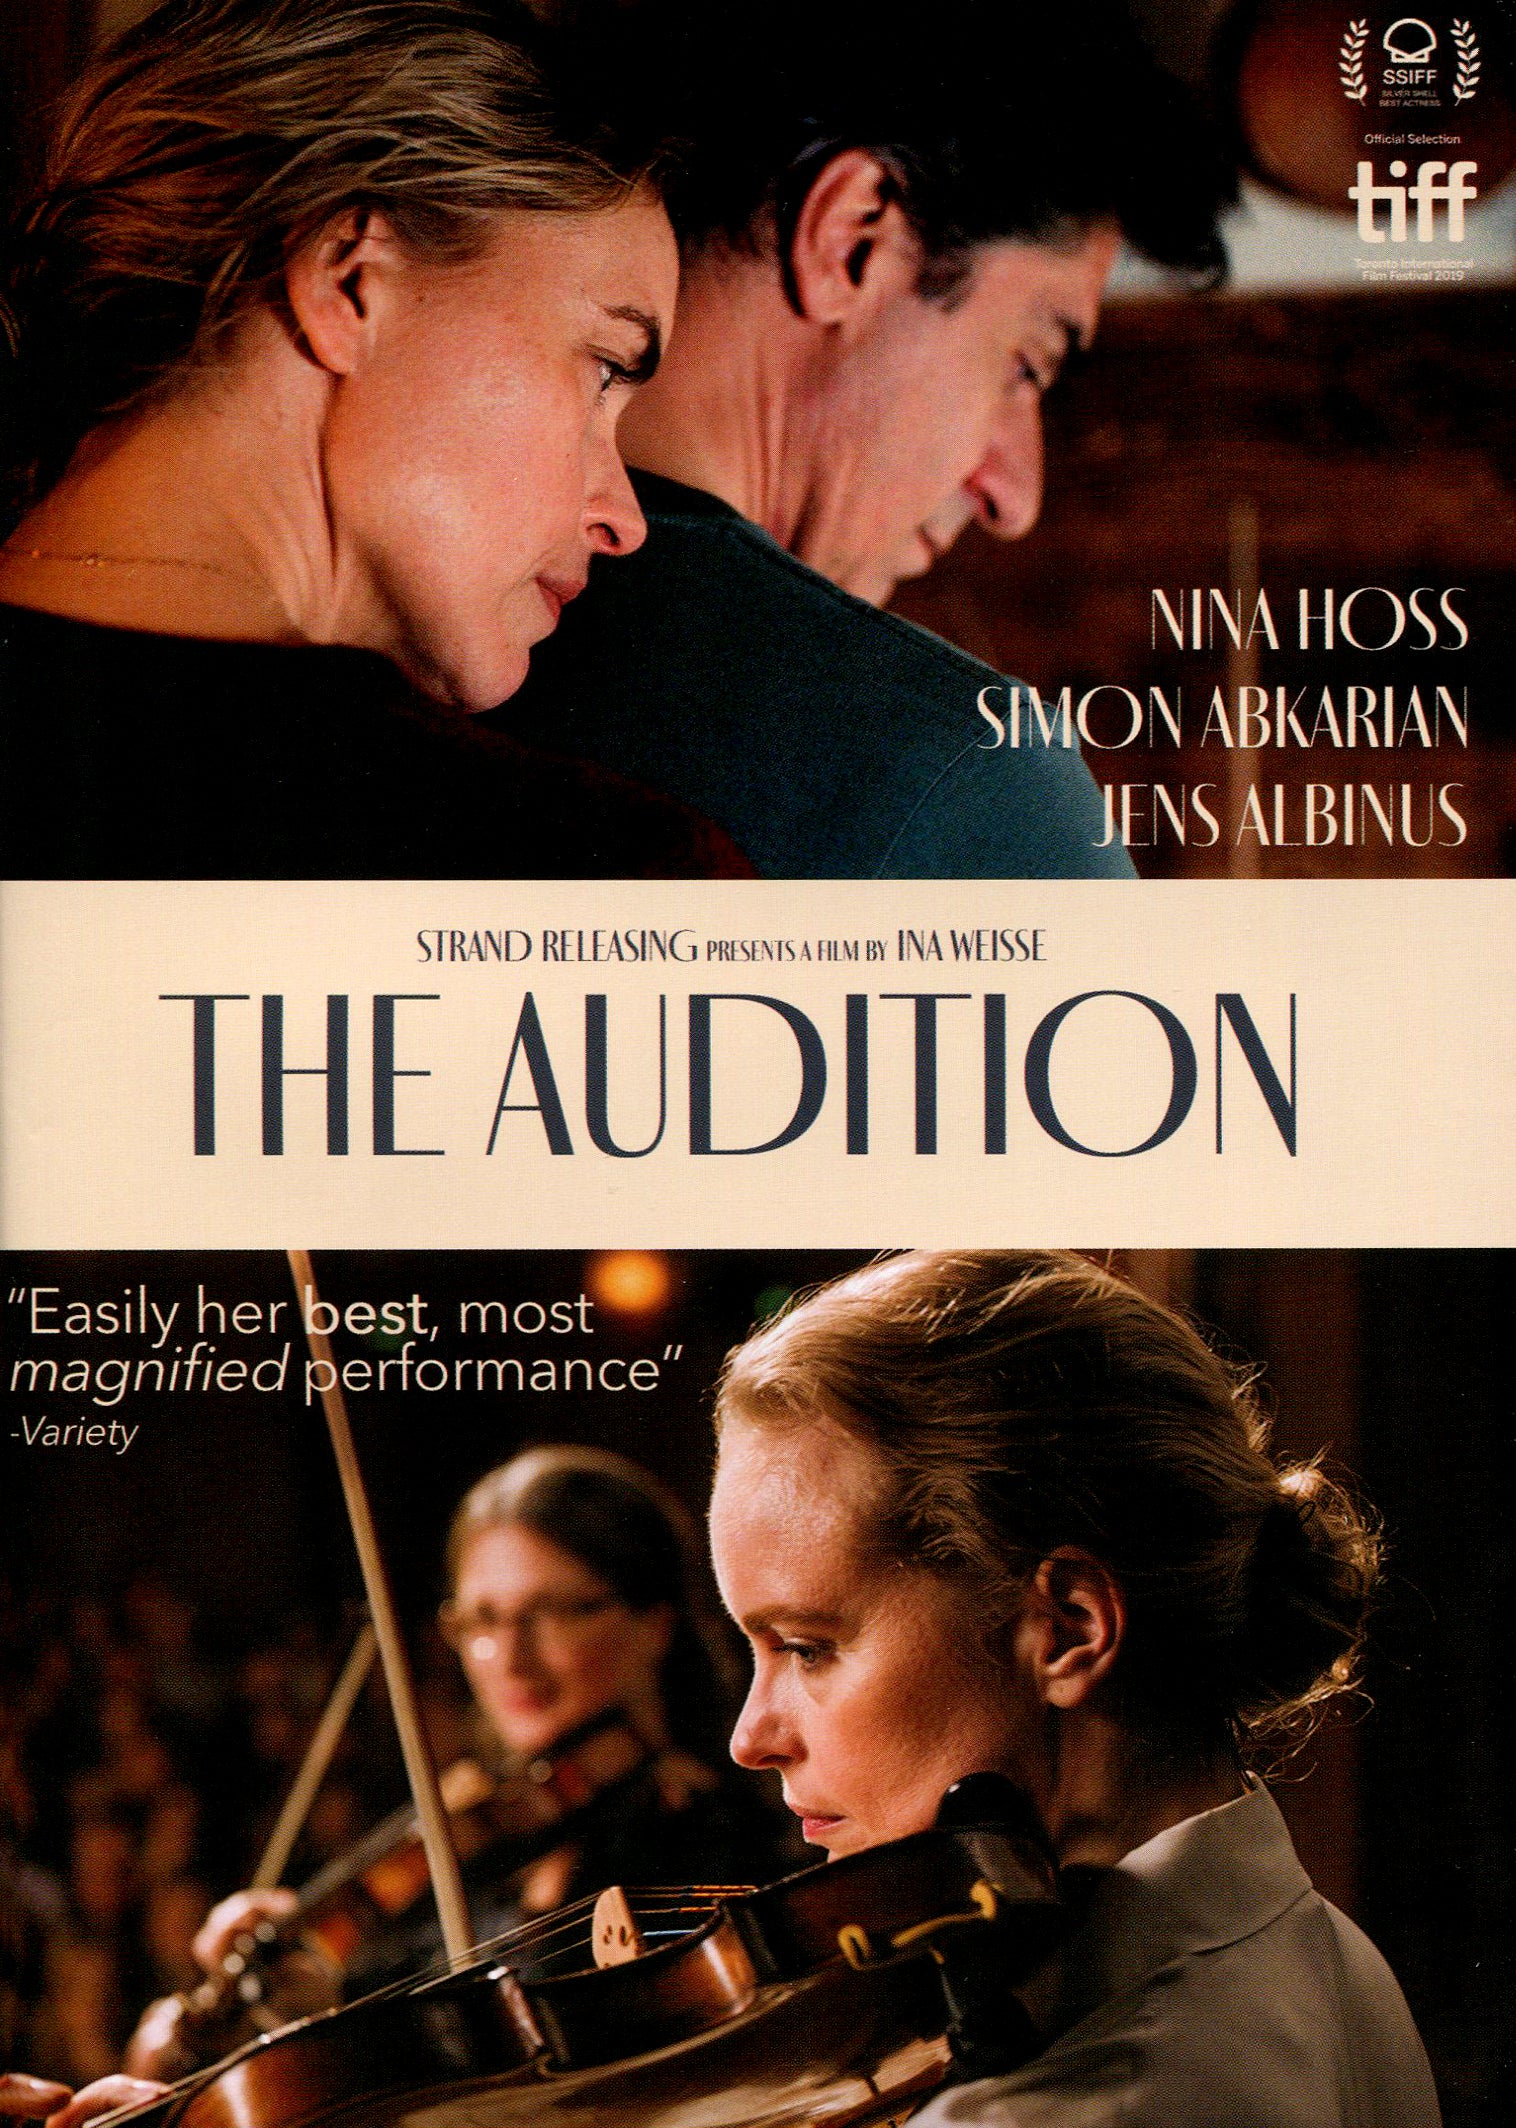 Audition cover art